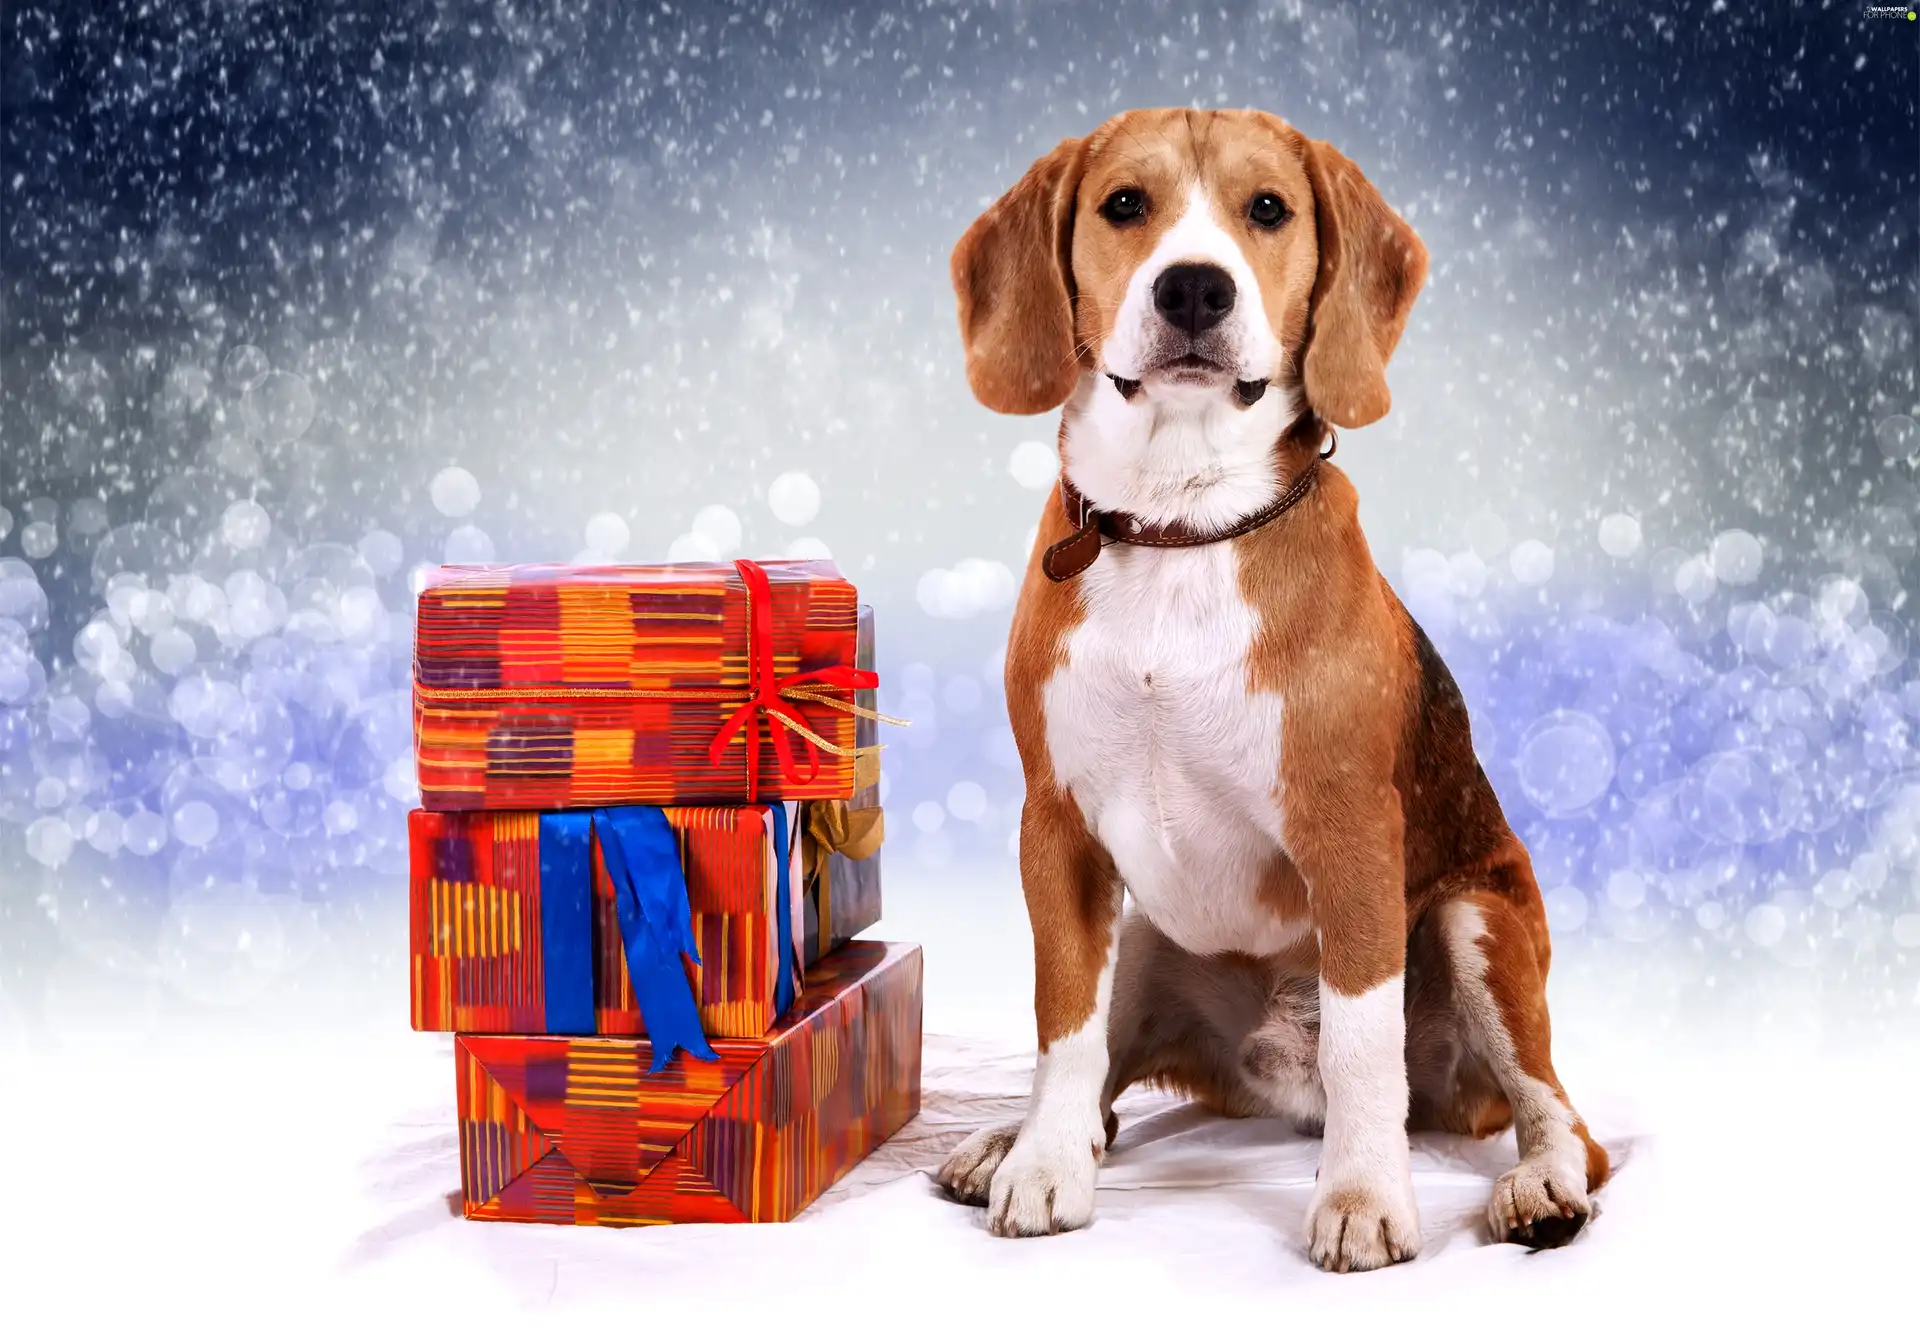 Beagle, incident, snow, gifts